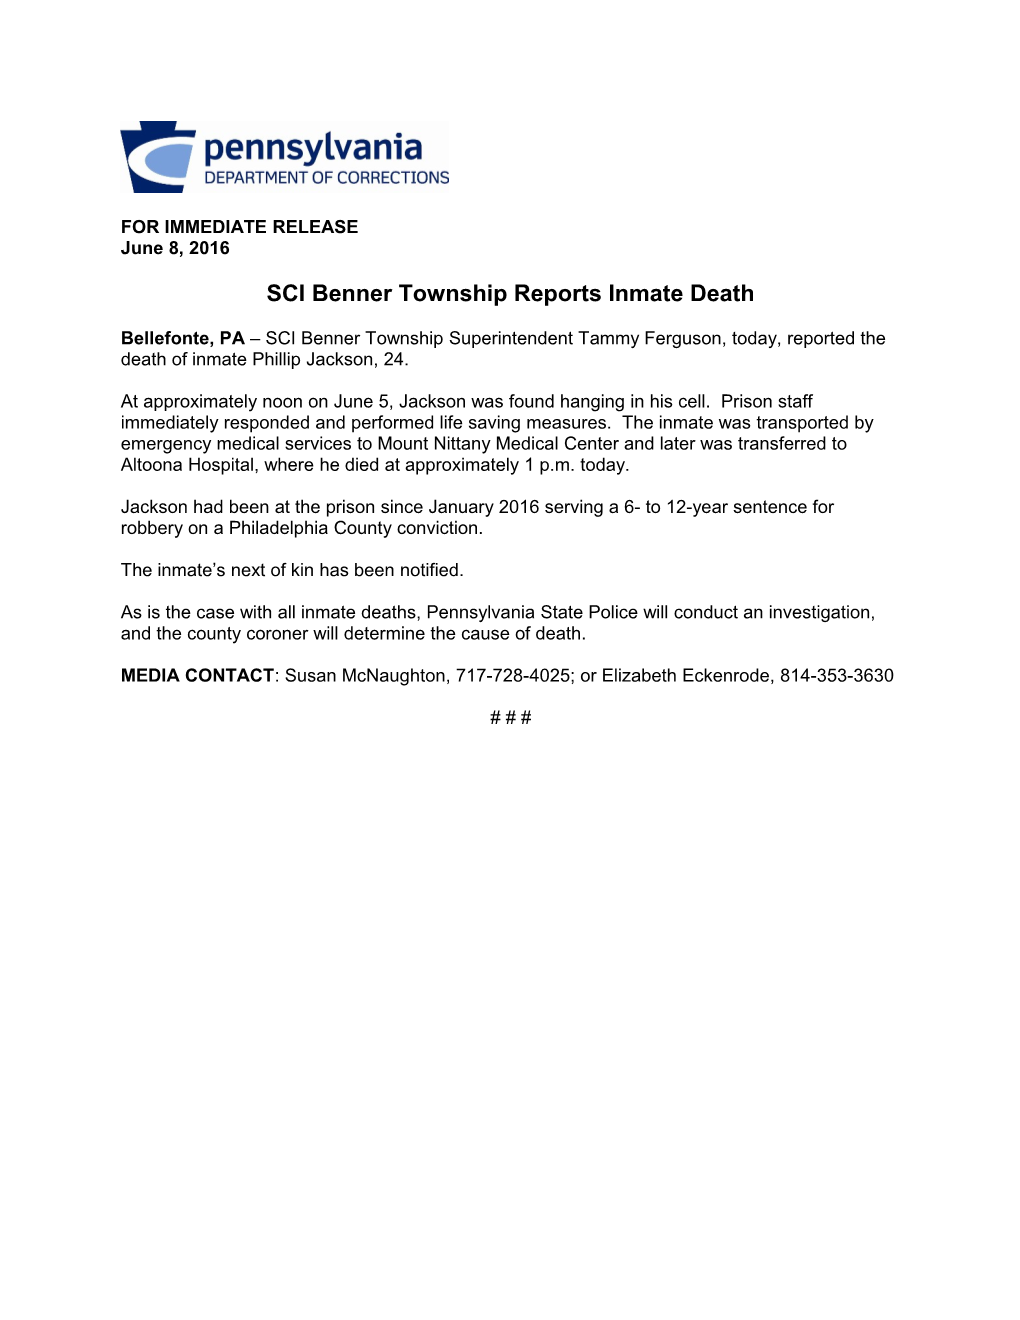 SCI Benner Township Reports Inmate Death